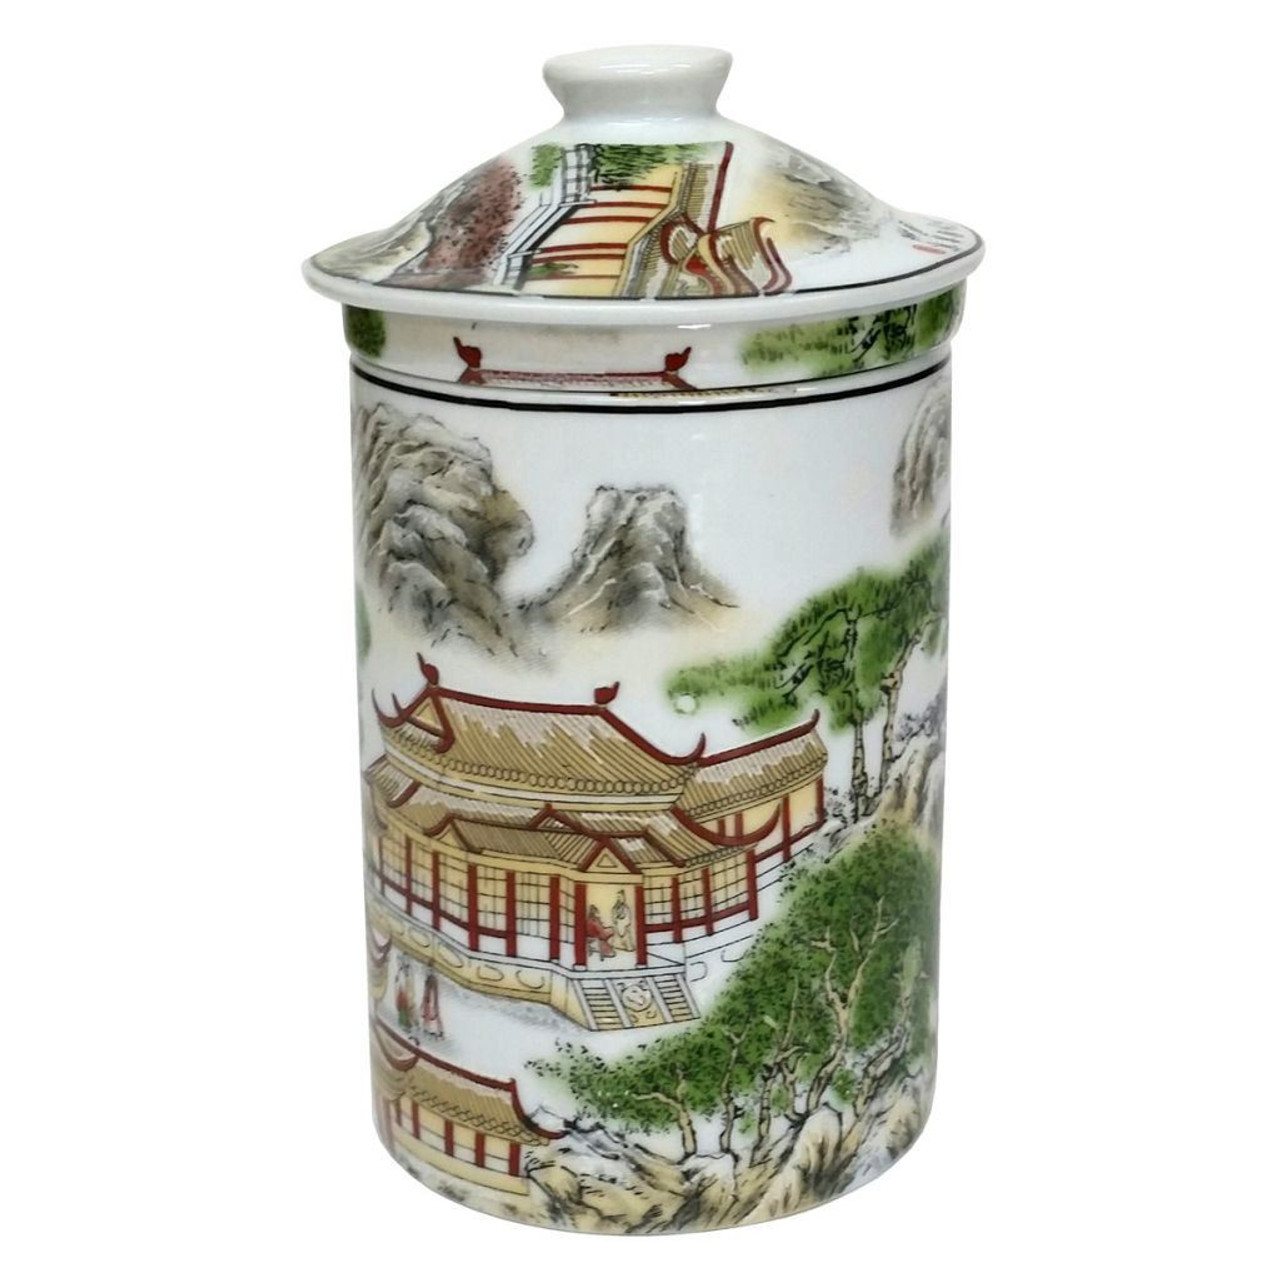 Porcelain Chinese Tea Mug with Infuser and Lid - Palaces Pattern - SECOND